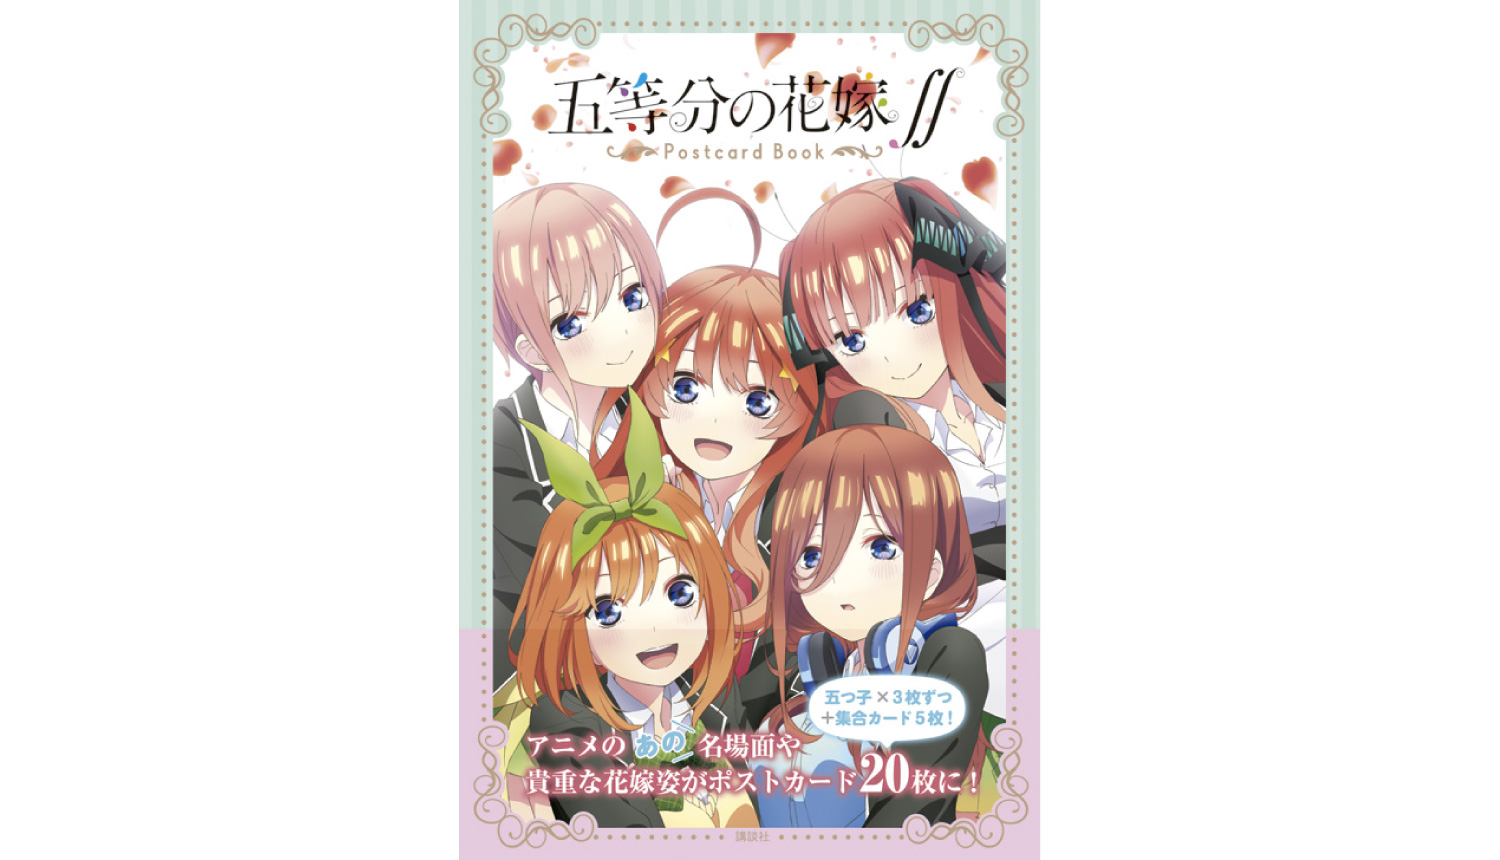 The Quintessential Quintuplets ∬ to Release Season Two Postcard